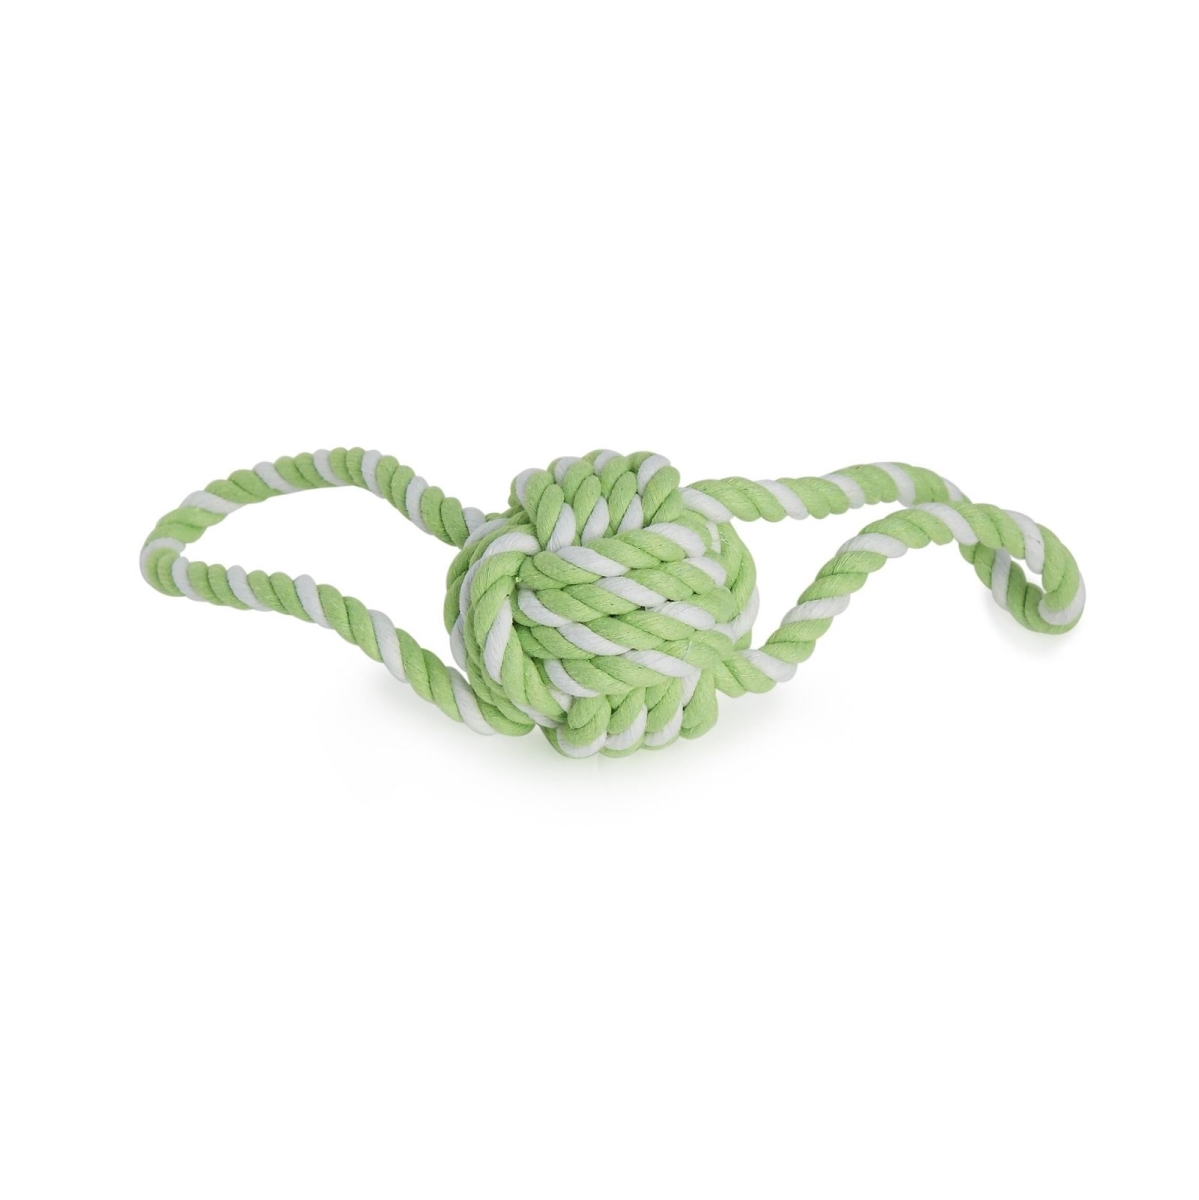 Replacement Ball Knot For Tugger Small